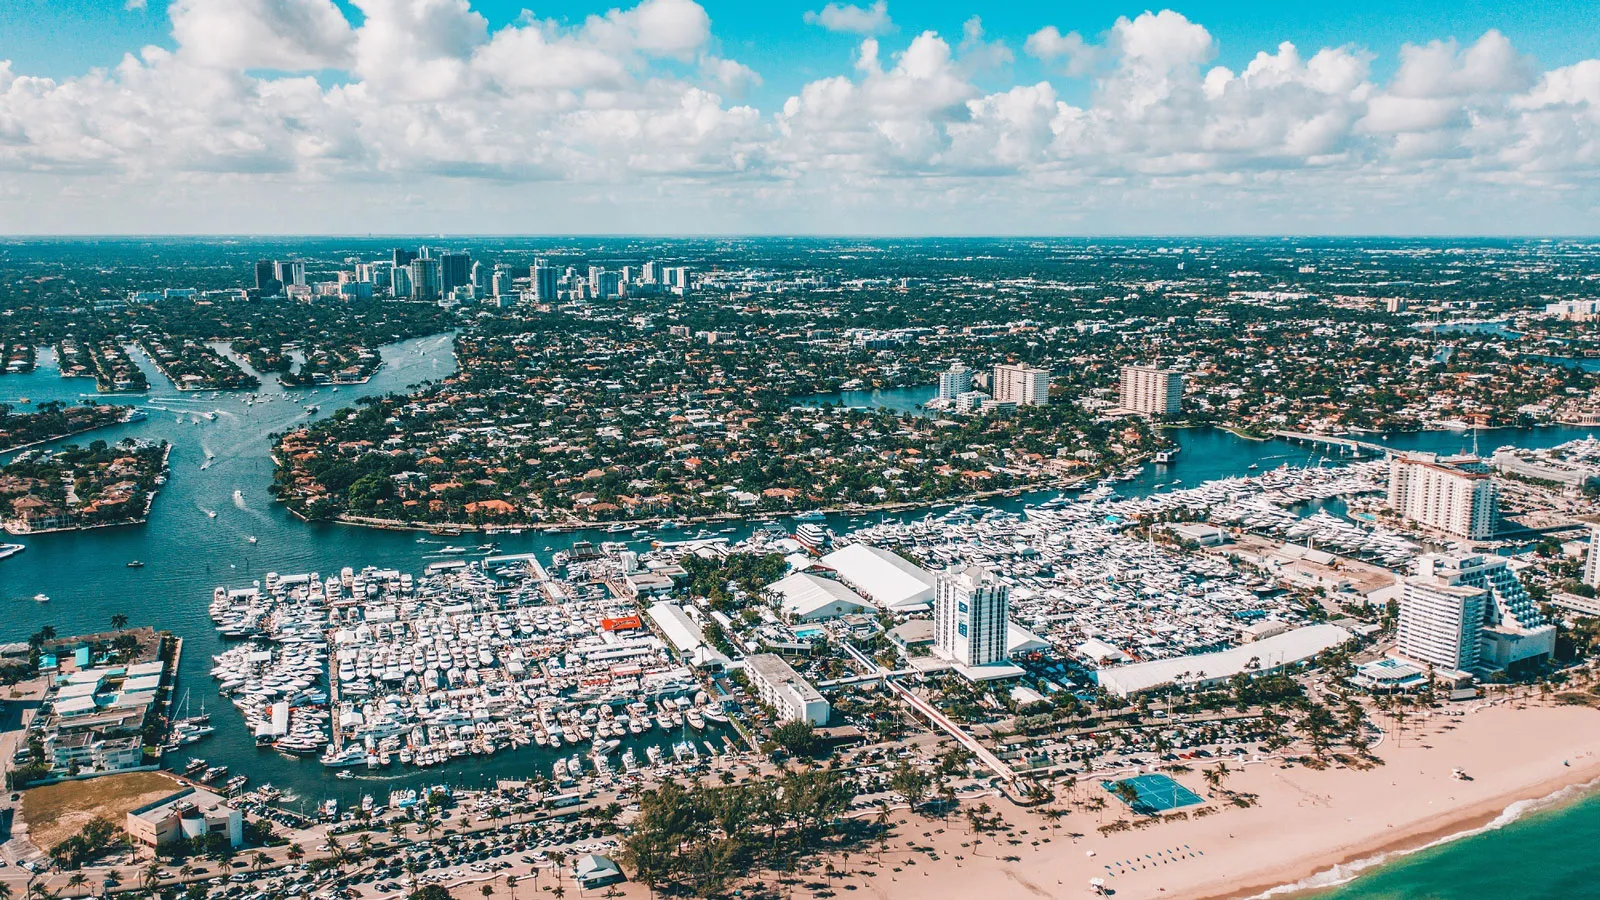 Fort Lauderdale Boat show aerial